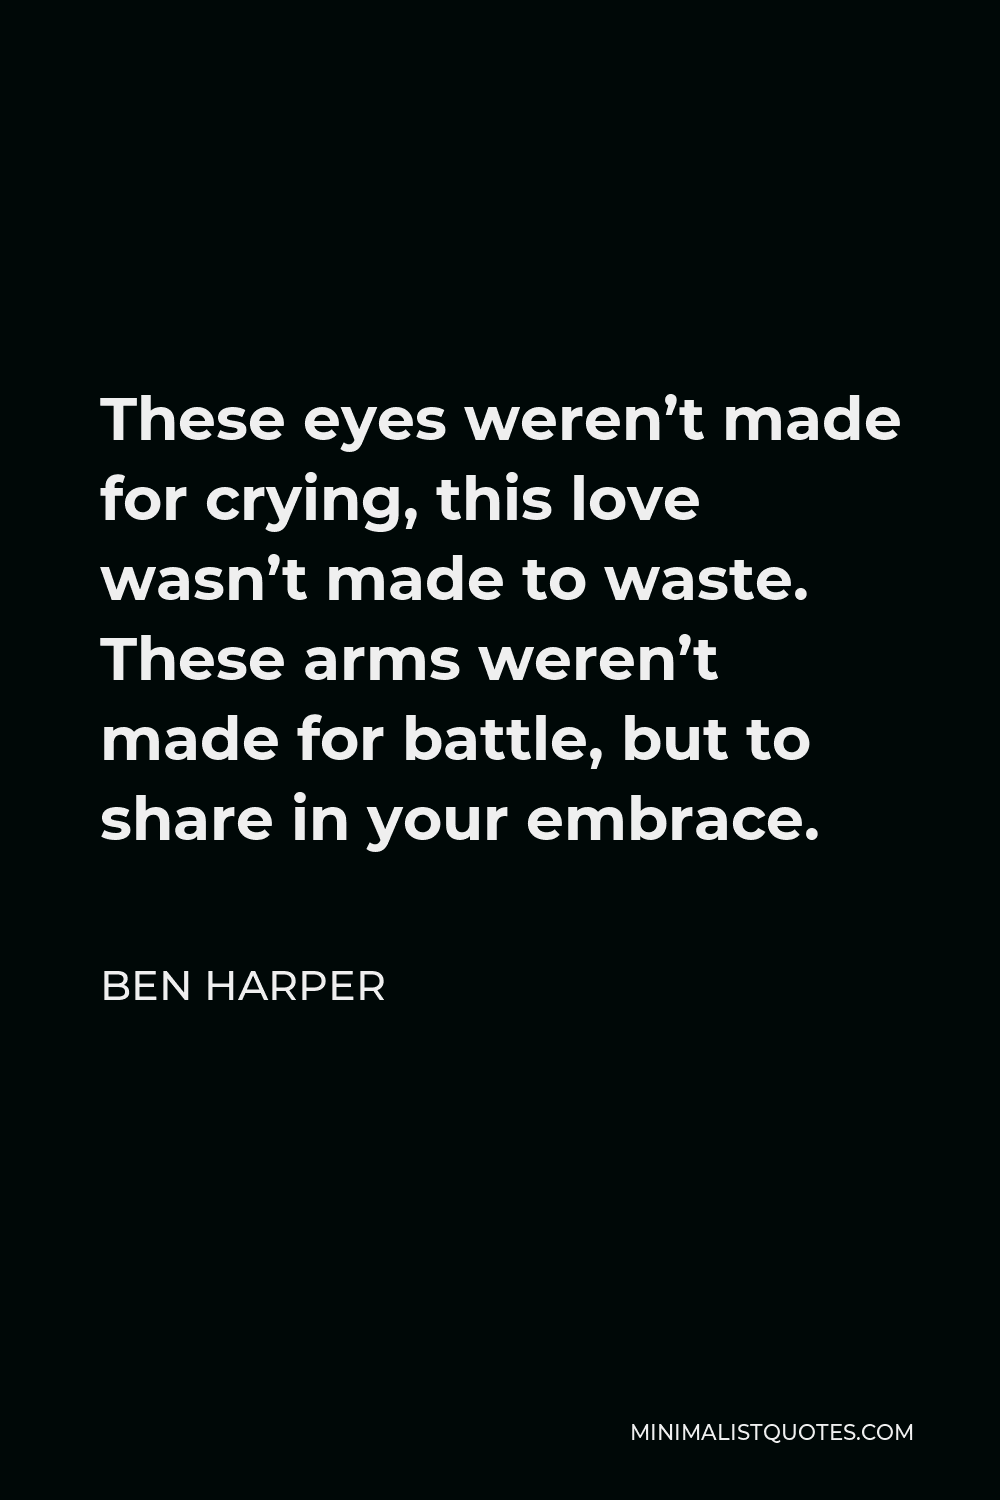 Ben Harper Quote - These eyes weren’t made for crying, this love wasn’t made to waste. These arms weren’t made for battle, but to share in your embrace.